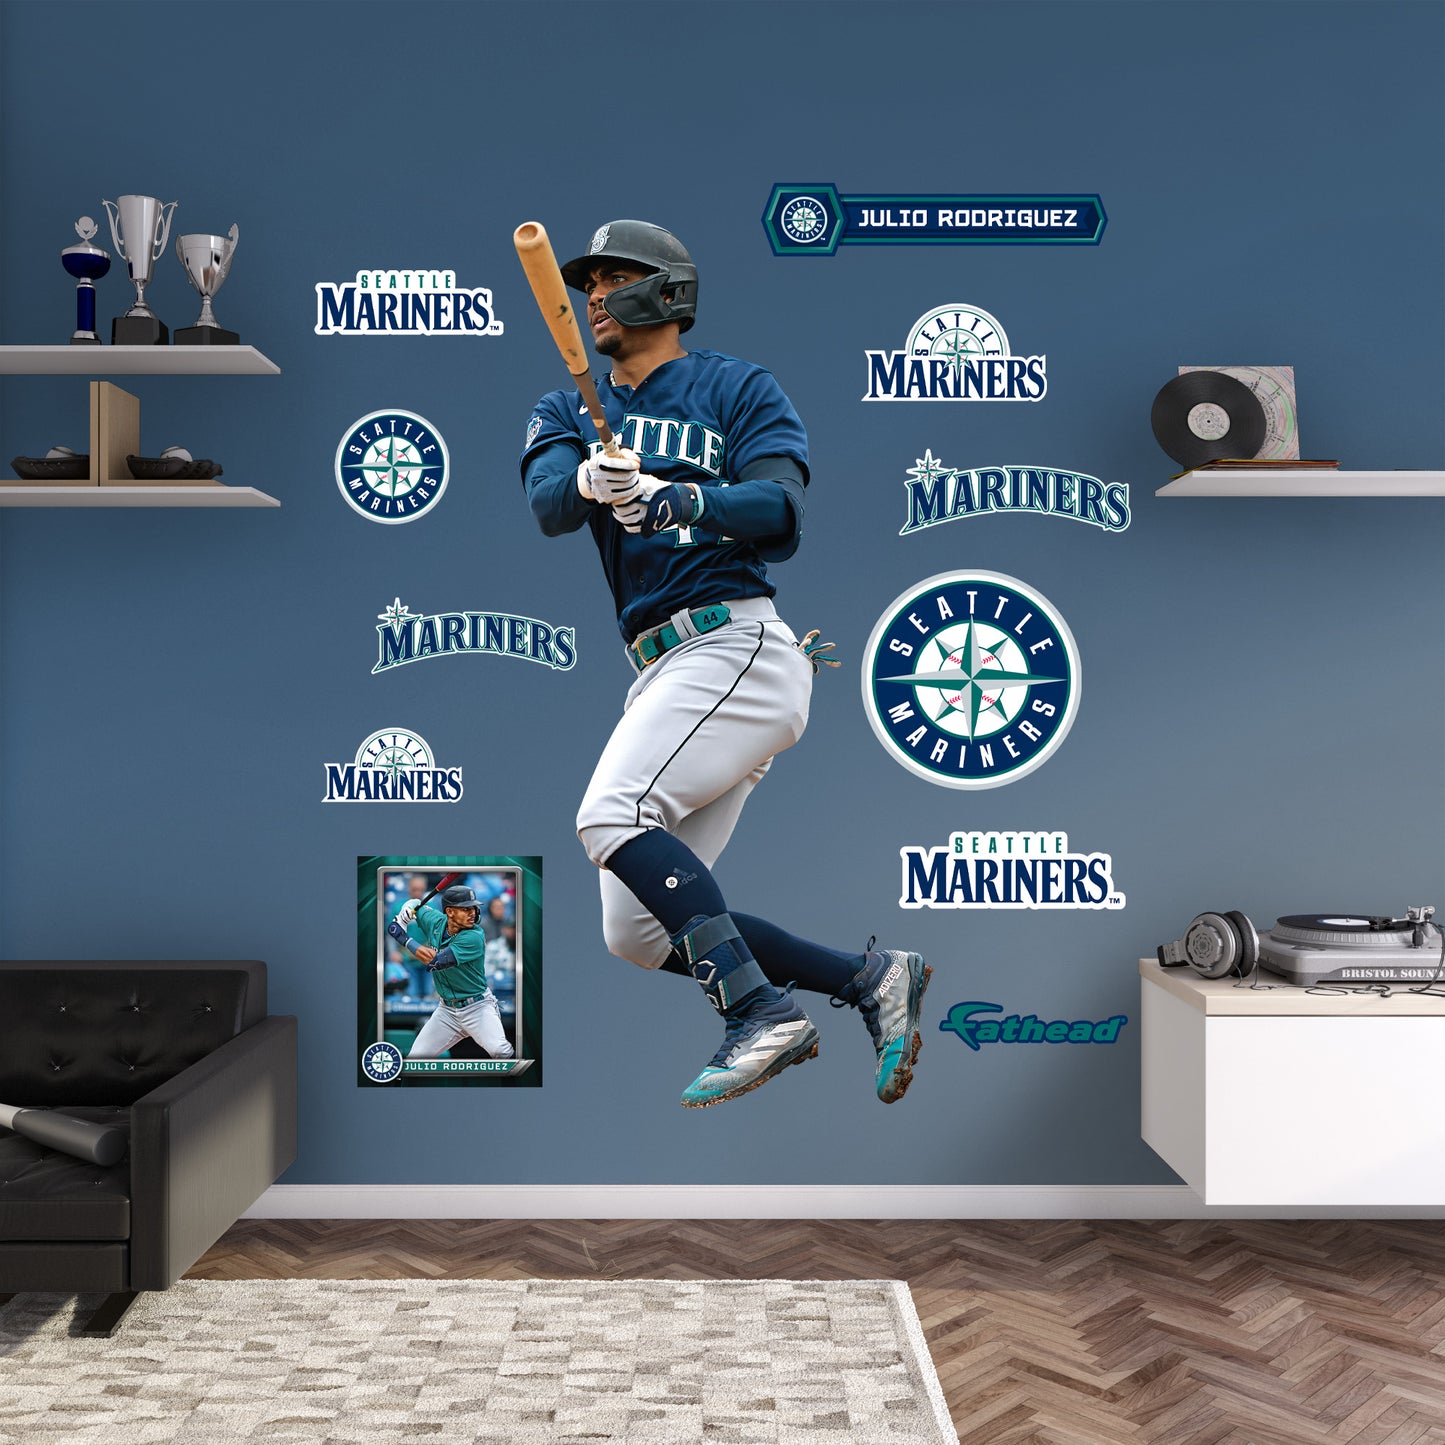 Seattle Mariners: Julio Rodriguez 2022 Life-Size Foam Core Cutout -  Officially Licensed MLB Stand Out